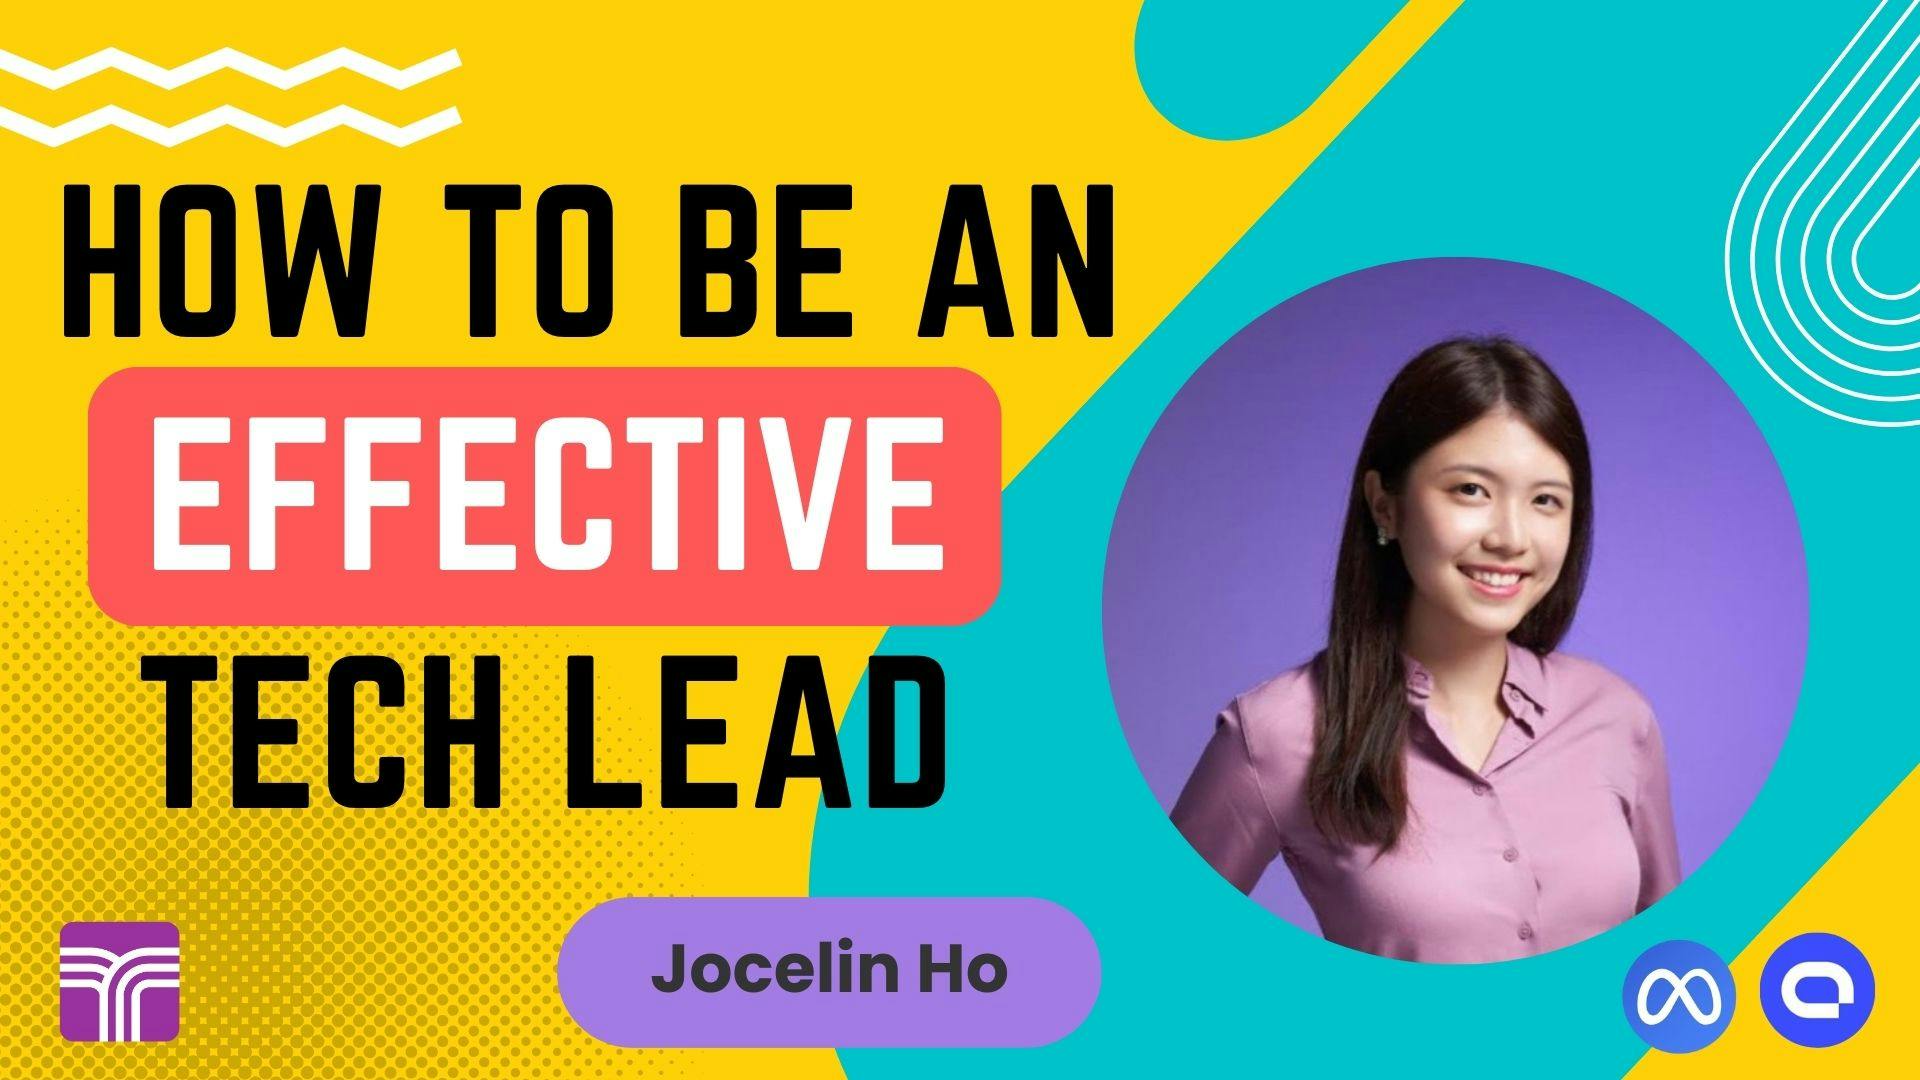 How To Be An Effective Tech Lead course image